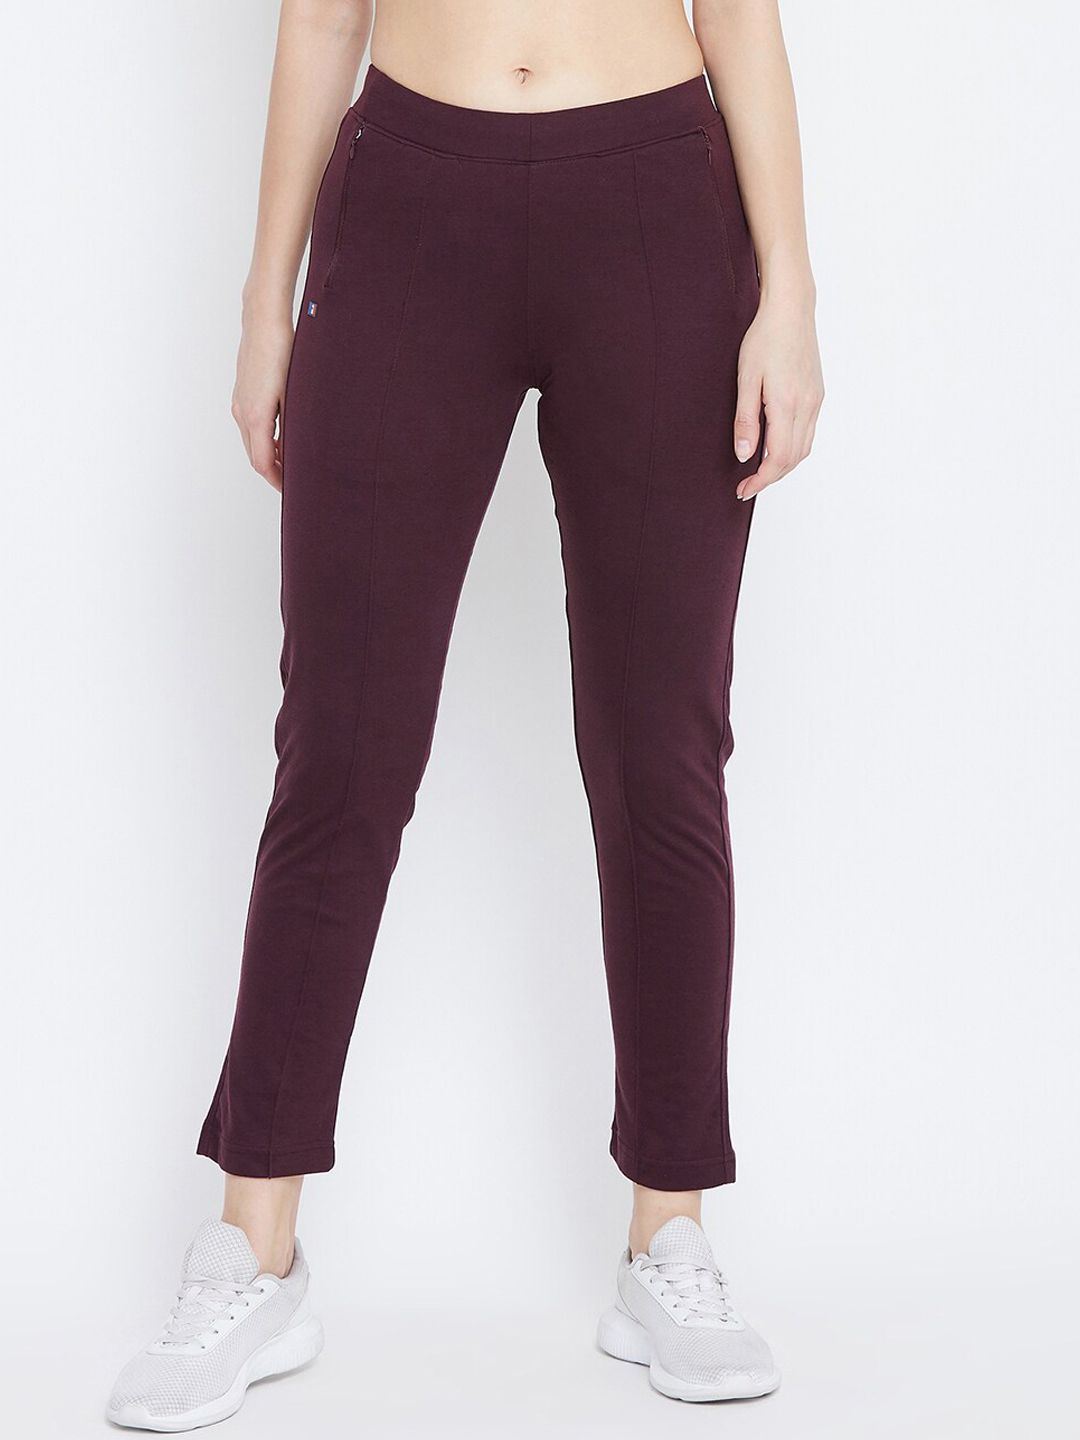 FRENCH FLEXIOUS Women Burgundy-Coloured Track Pants Price in India